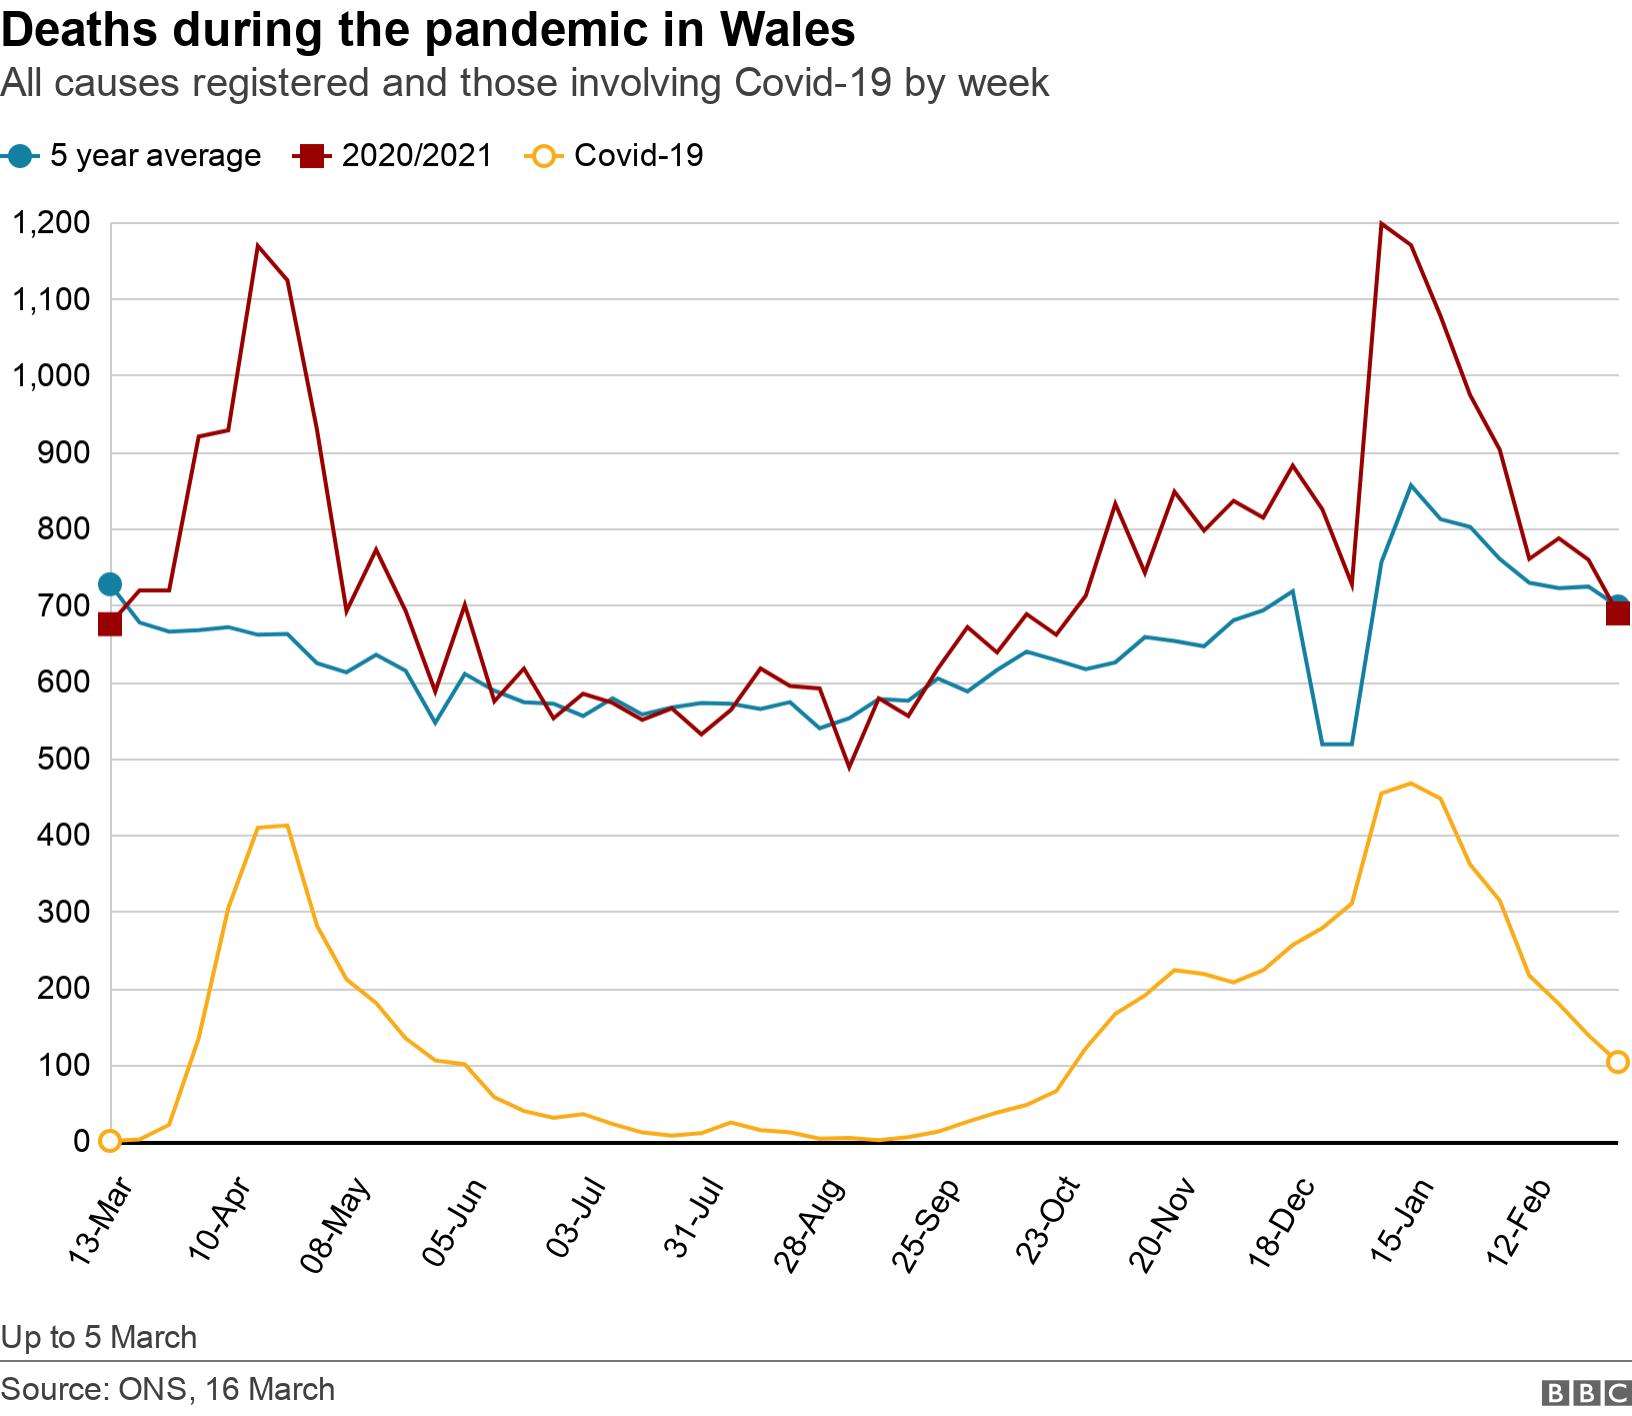 Deaths during the pandemic in Wales. All causes registered and those involving Covid-19 by week.  Up to 5 March.